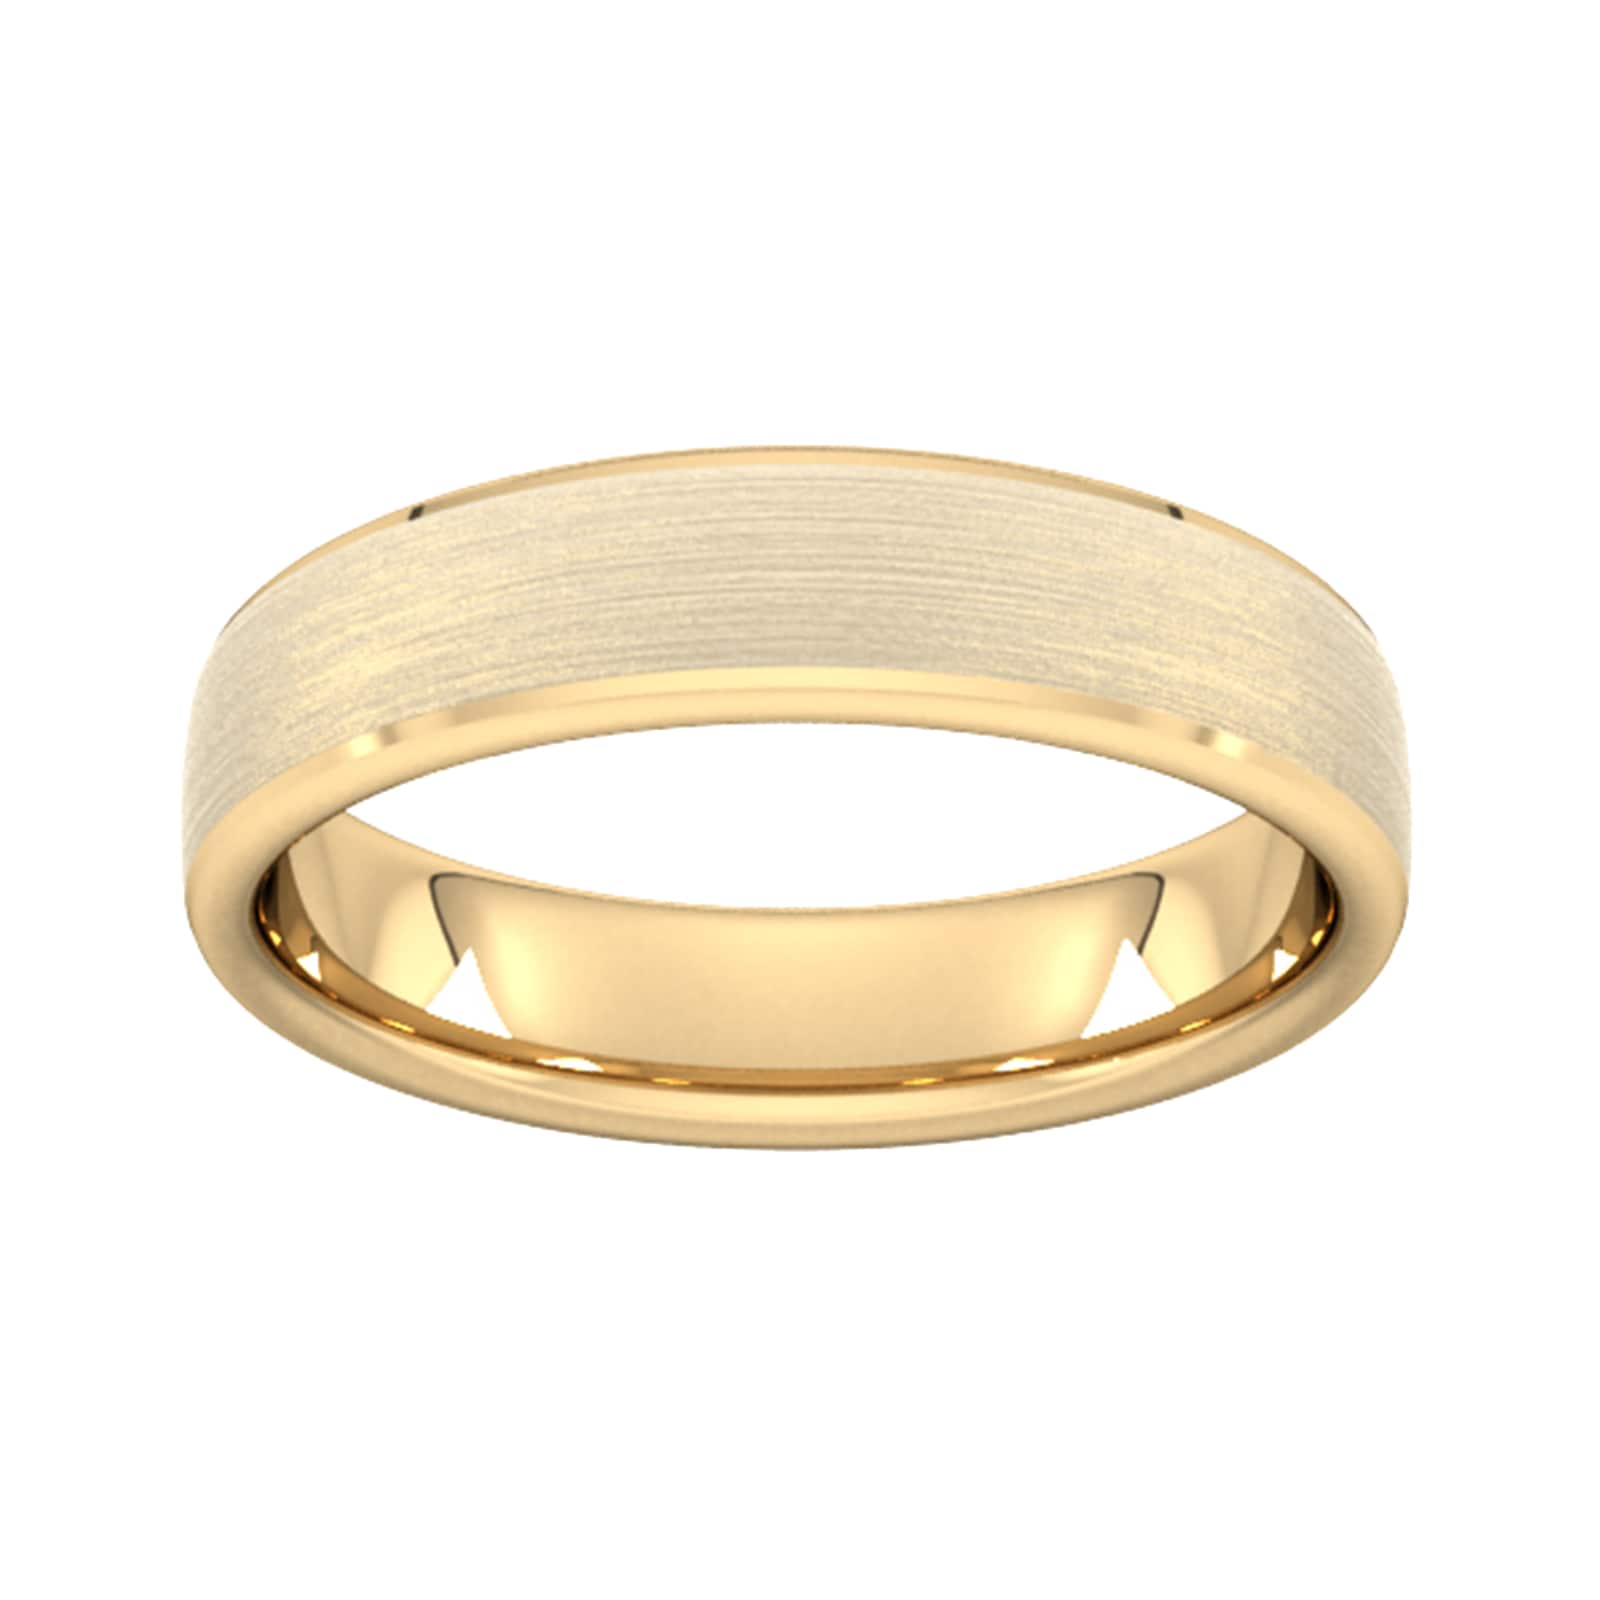 5mm Flat Court Heavy Polished Chamfered Edges With Matt Centre Wedding Ring In 18 Carat Yellow Gold - Ring Size I